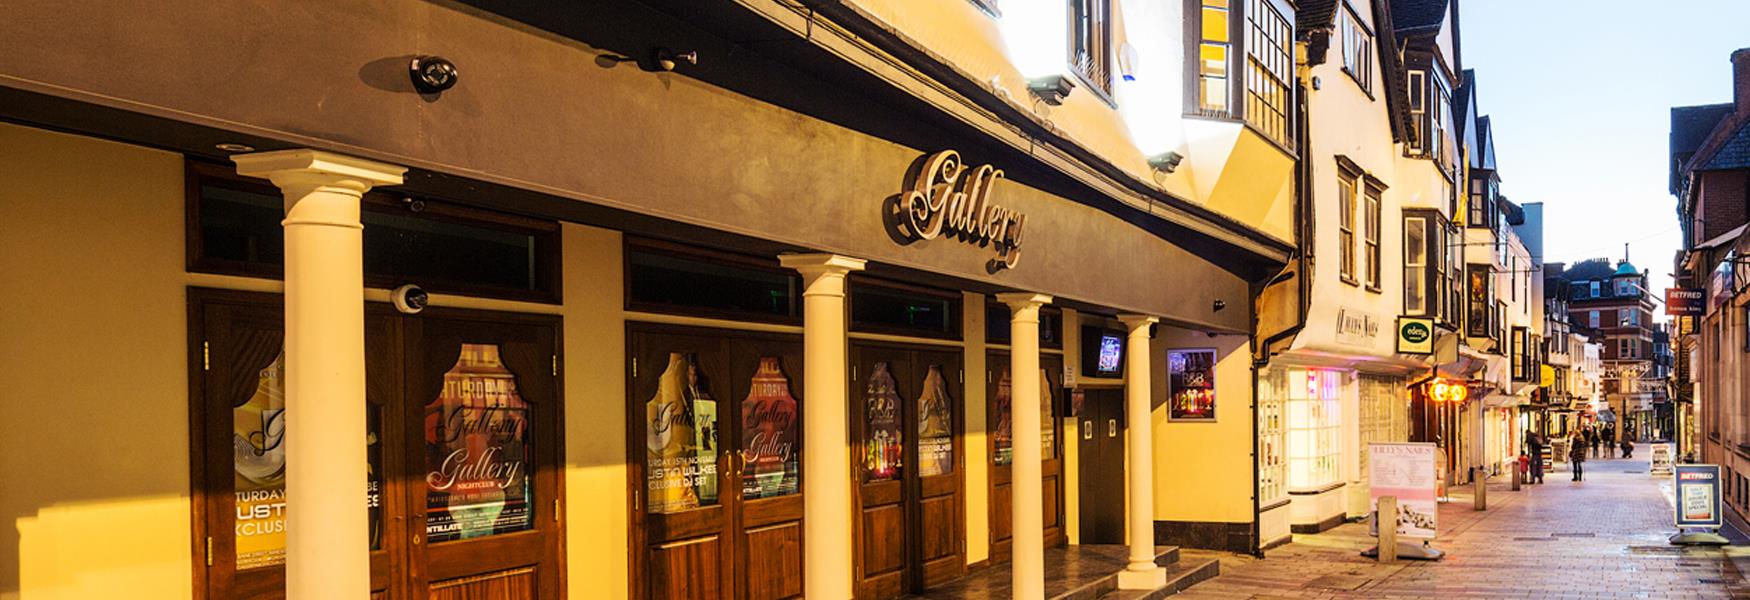 Gallery Nightclub is housed in a Grade II listed building